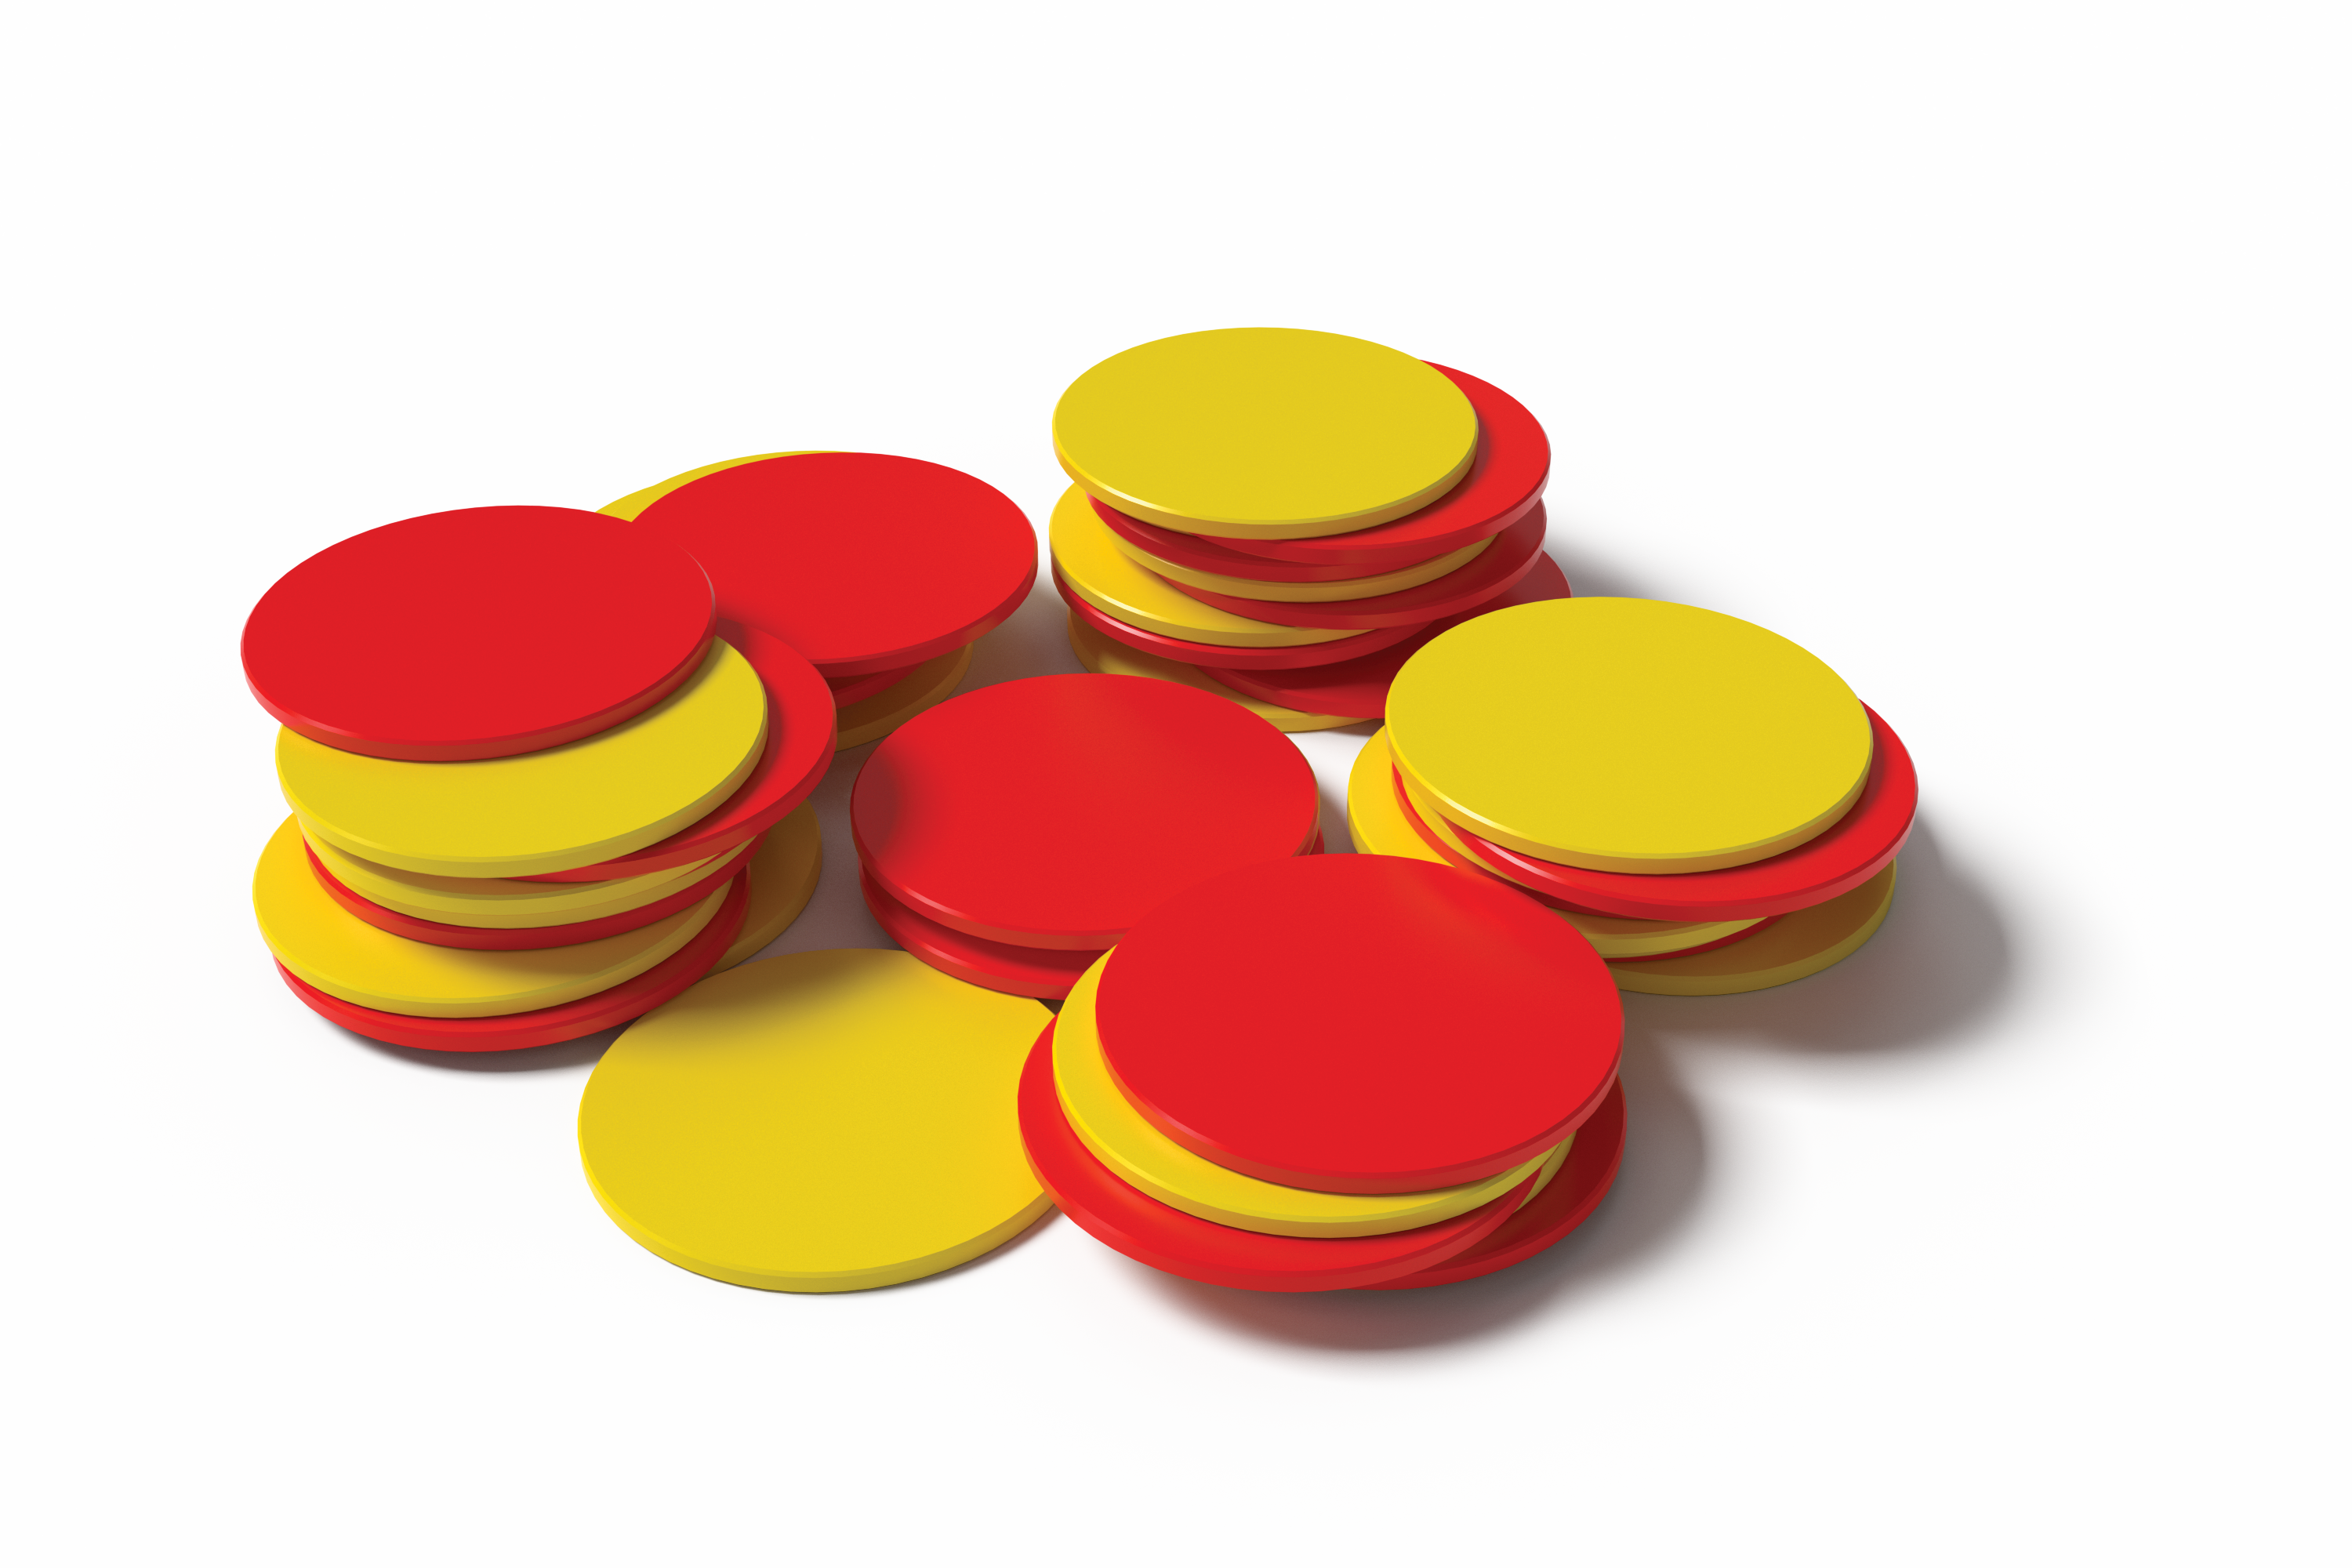 Two-color counters, red and yellow.